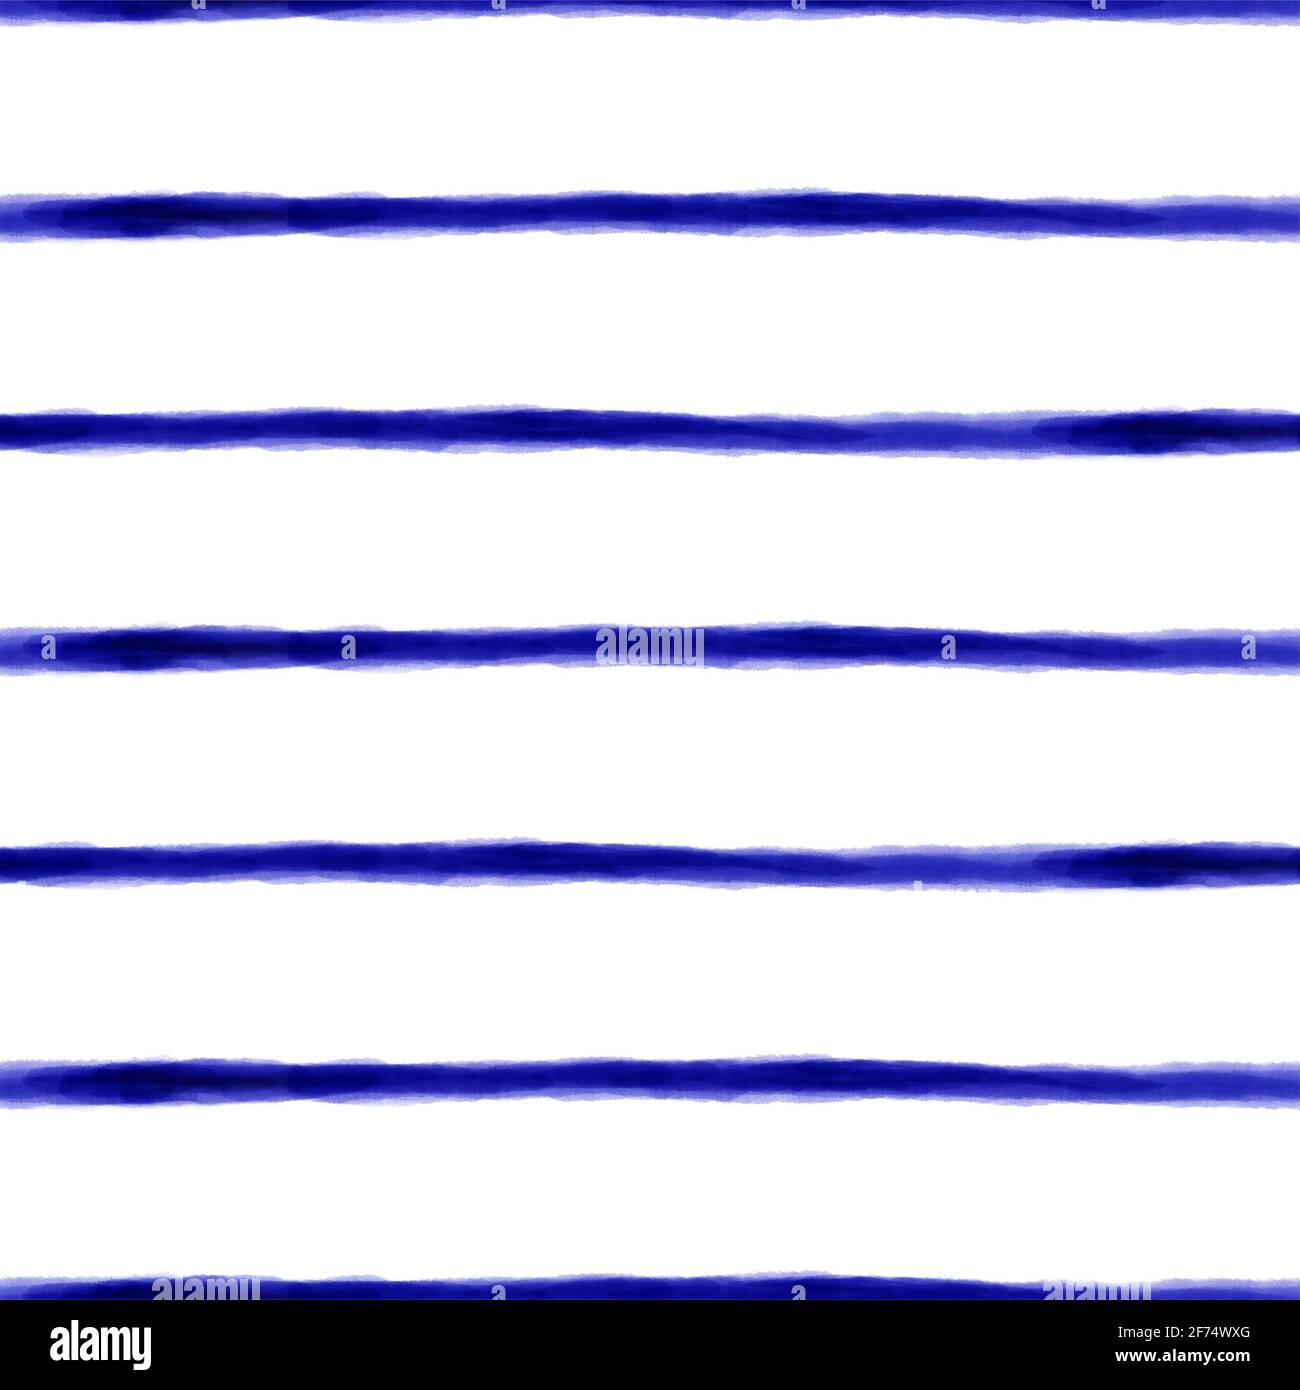 Blue Watercolor seamless stripes pattern background. Dark royal blue ink stripes thin horizontal on white repeating pattern. High quality photo. Stock Photo